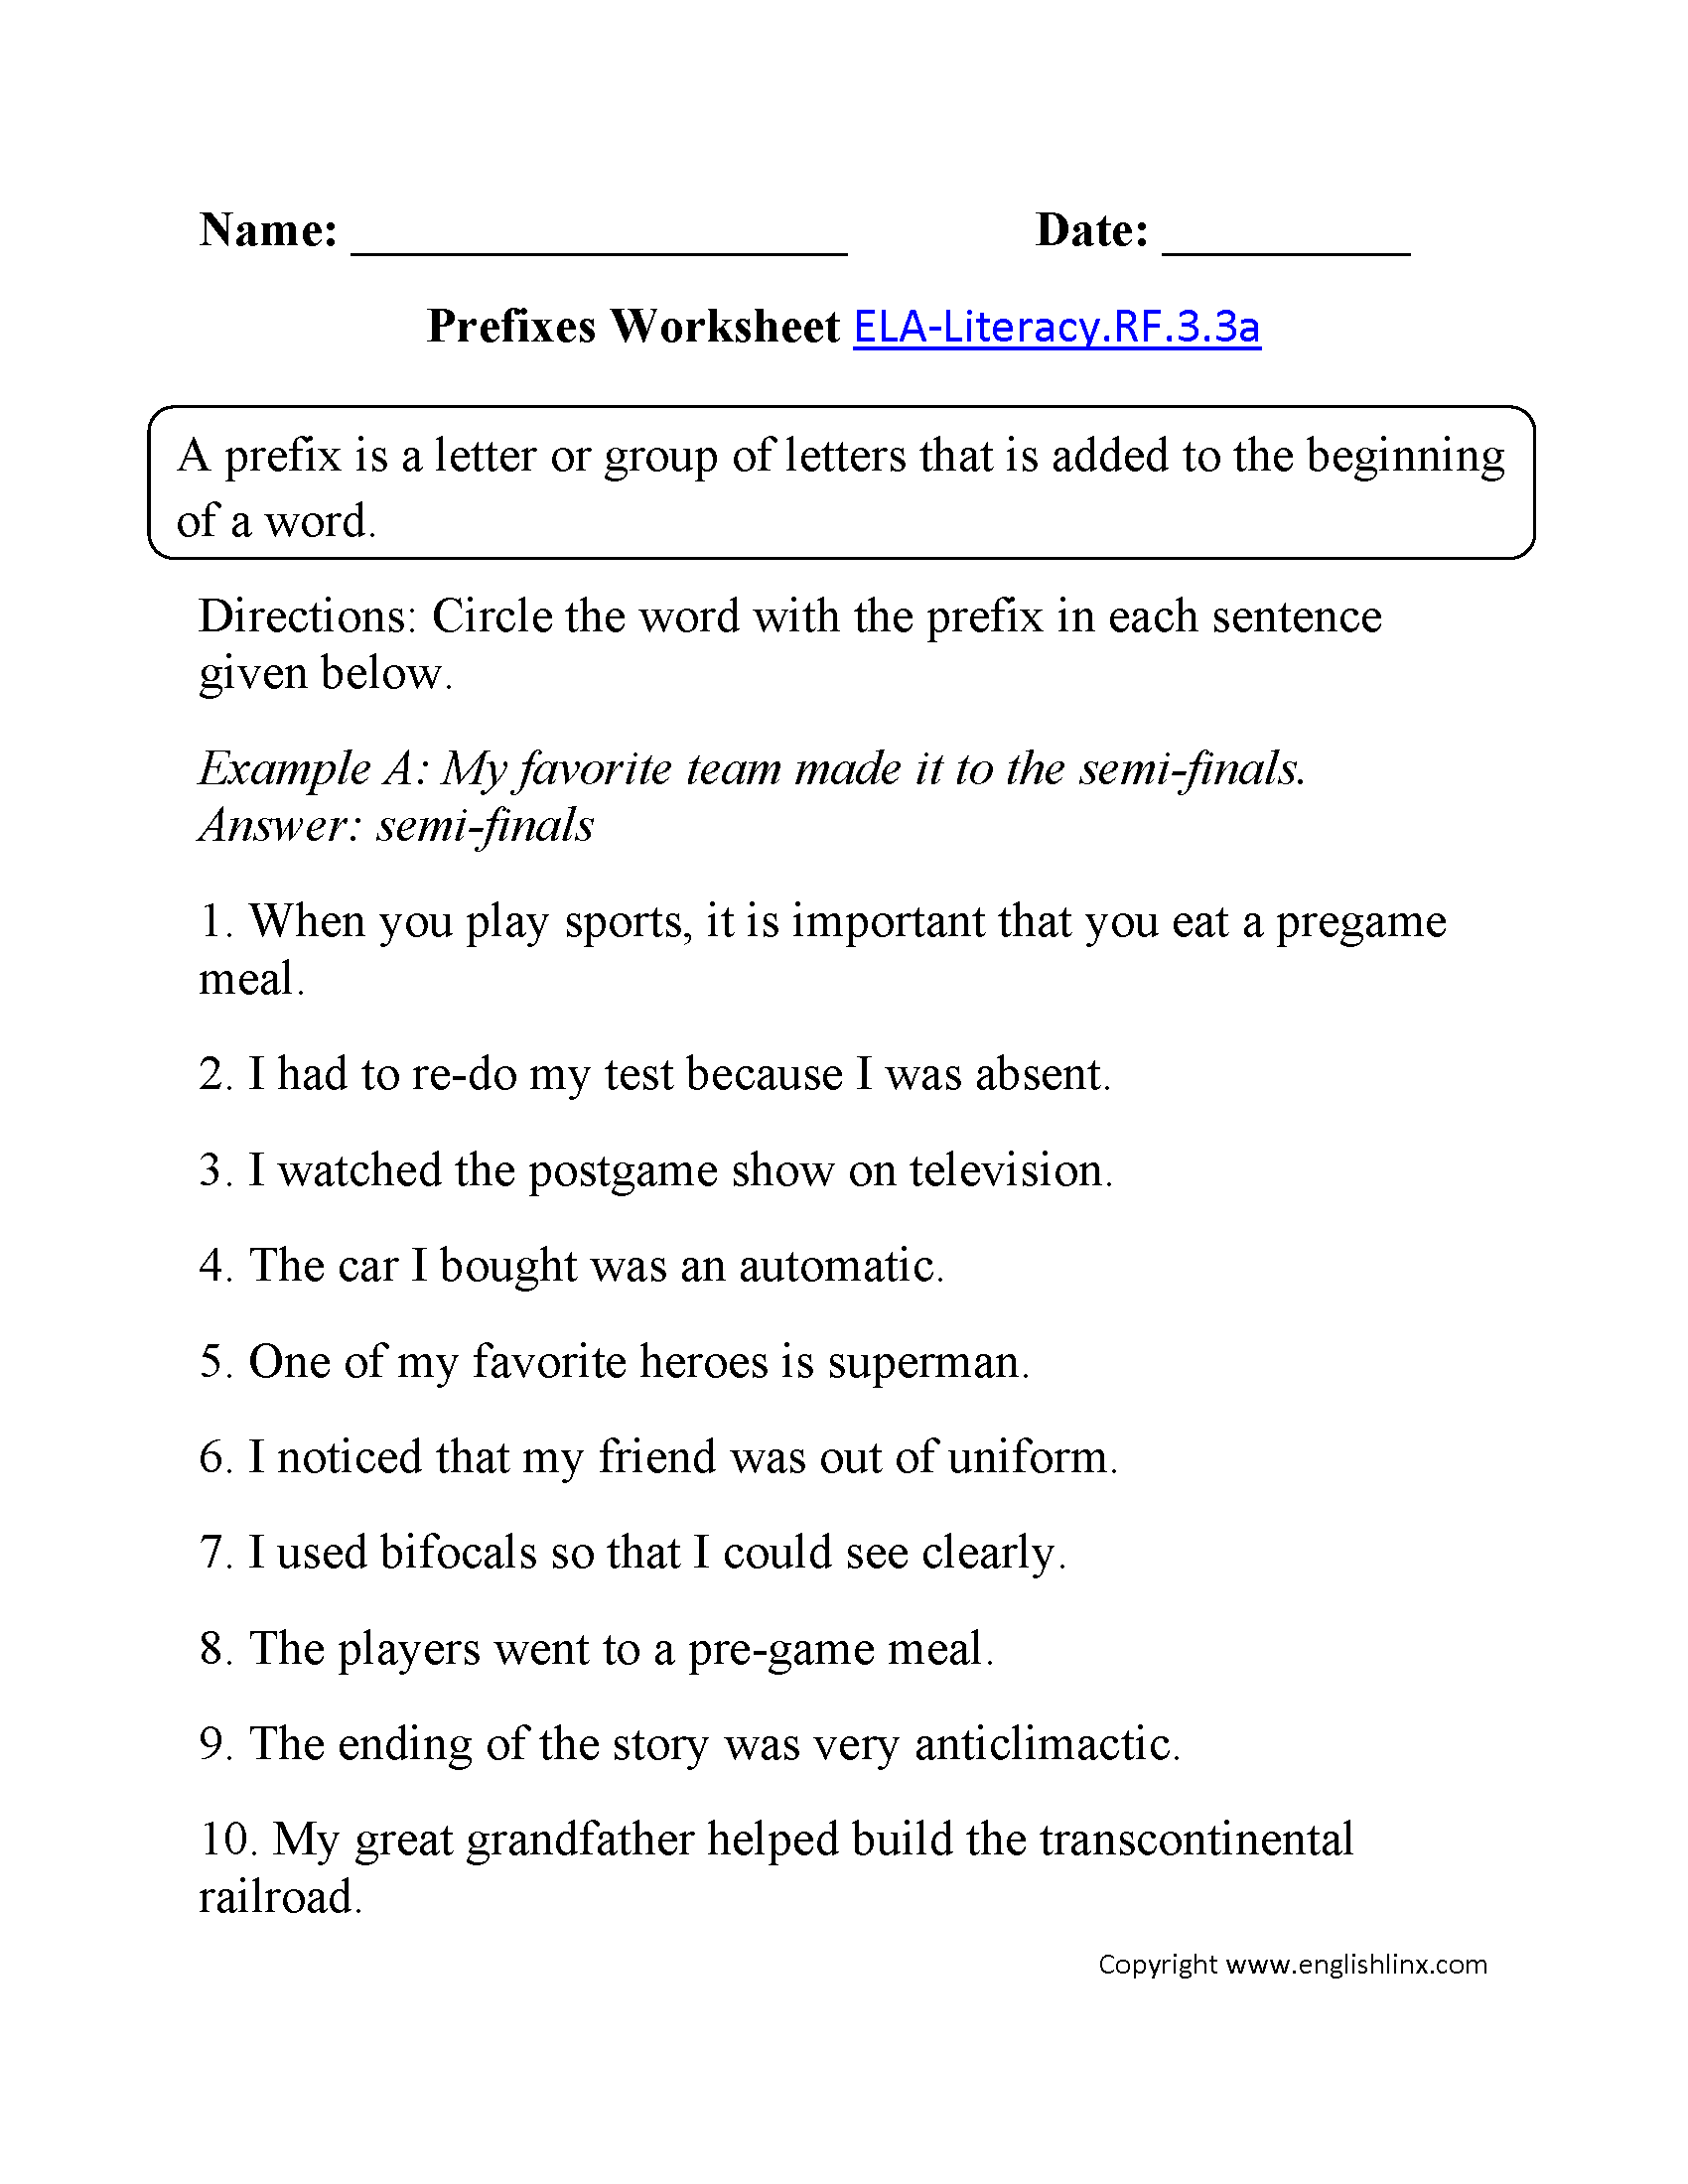 3rd Grade Common Core Reading Foundational Skills Worksheets